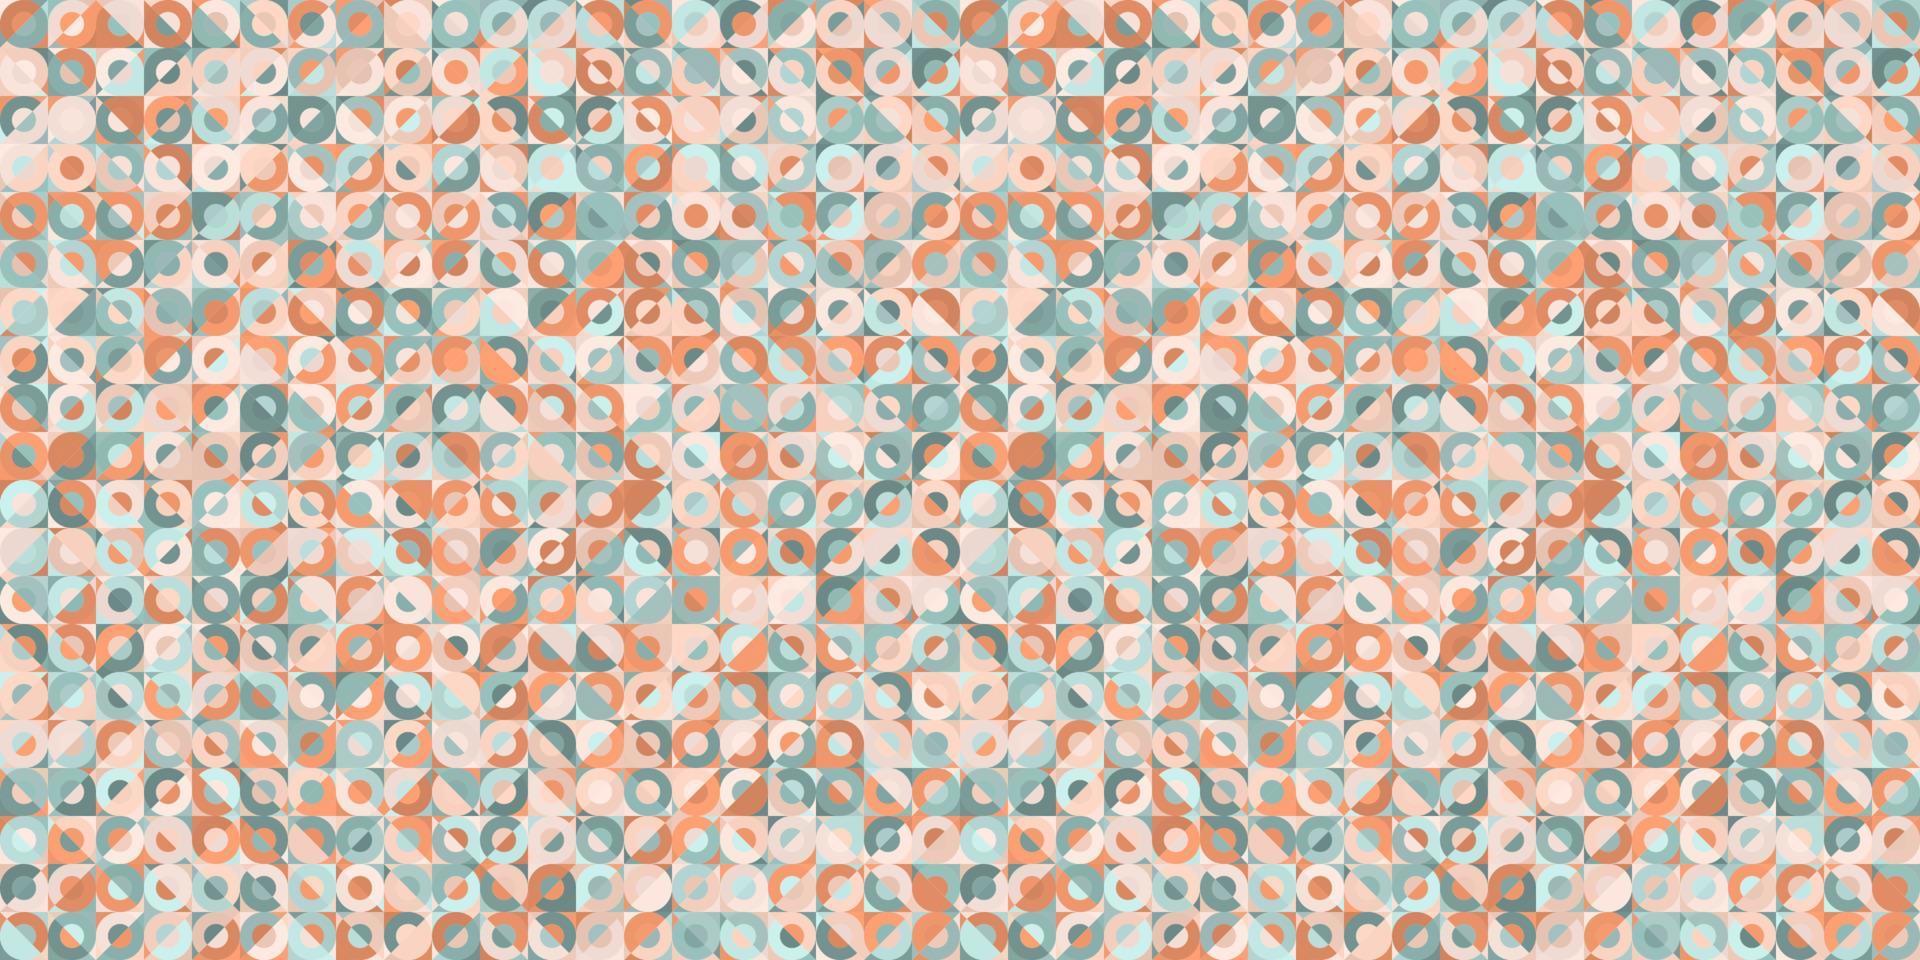 Abstract art small geometric random colorful circle-triangle shape seamless pattern trendy background. Use for template, cover, fabric, interior decoration elements. vector